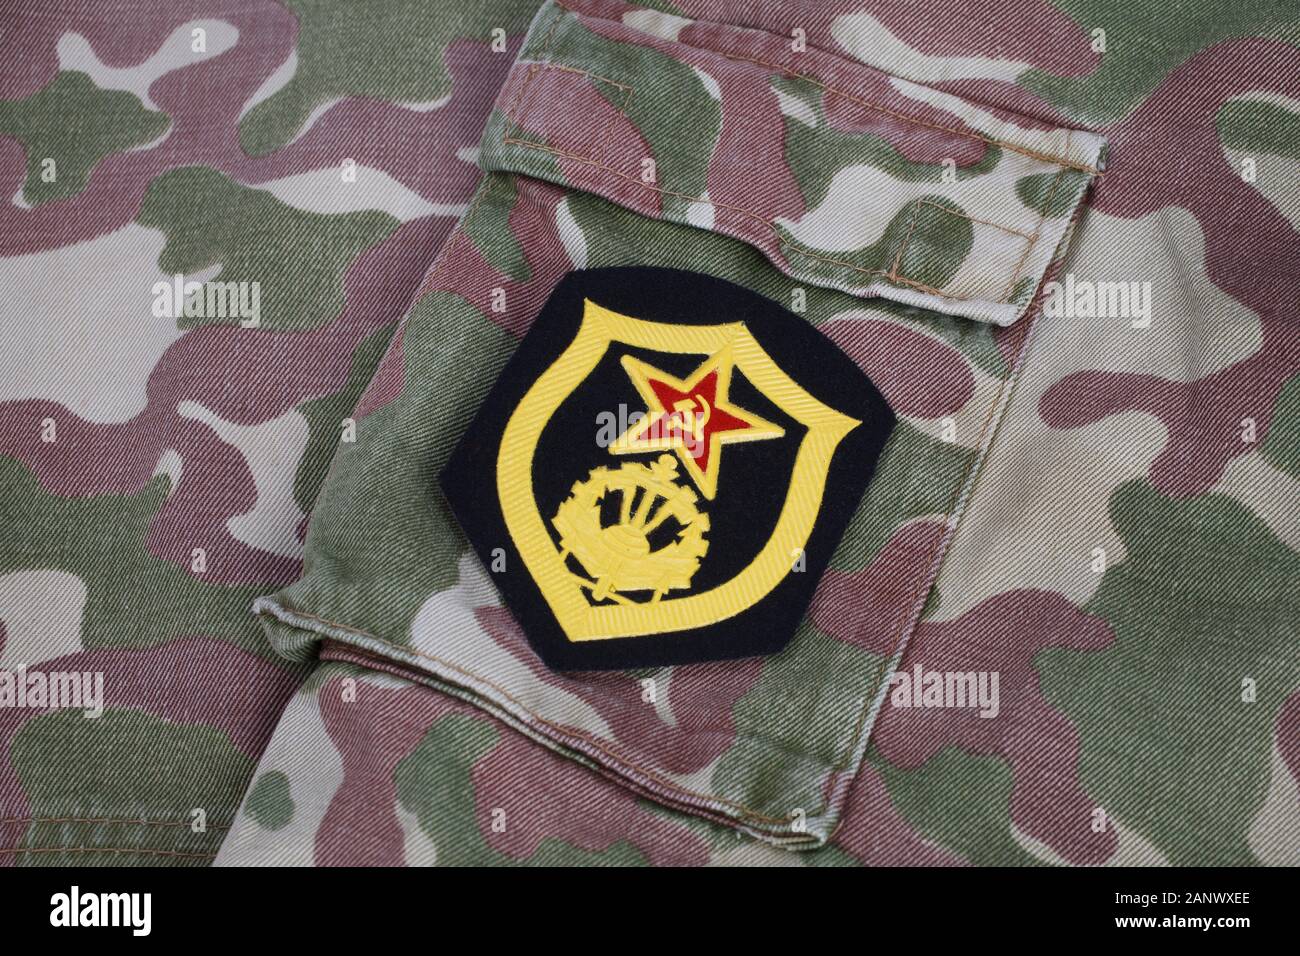 USSR military uniform - Soviet Army Combat engineer shoulder patch on camouflage uniform Stock Photo